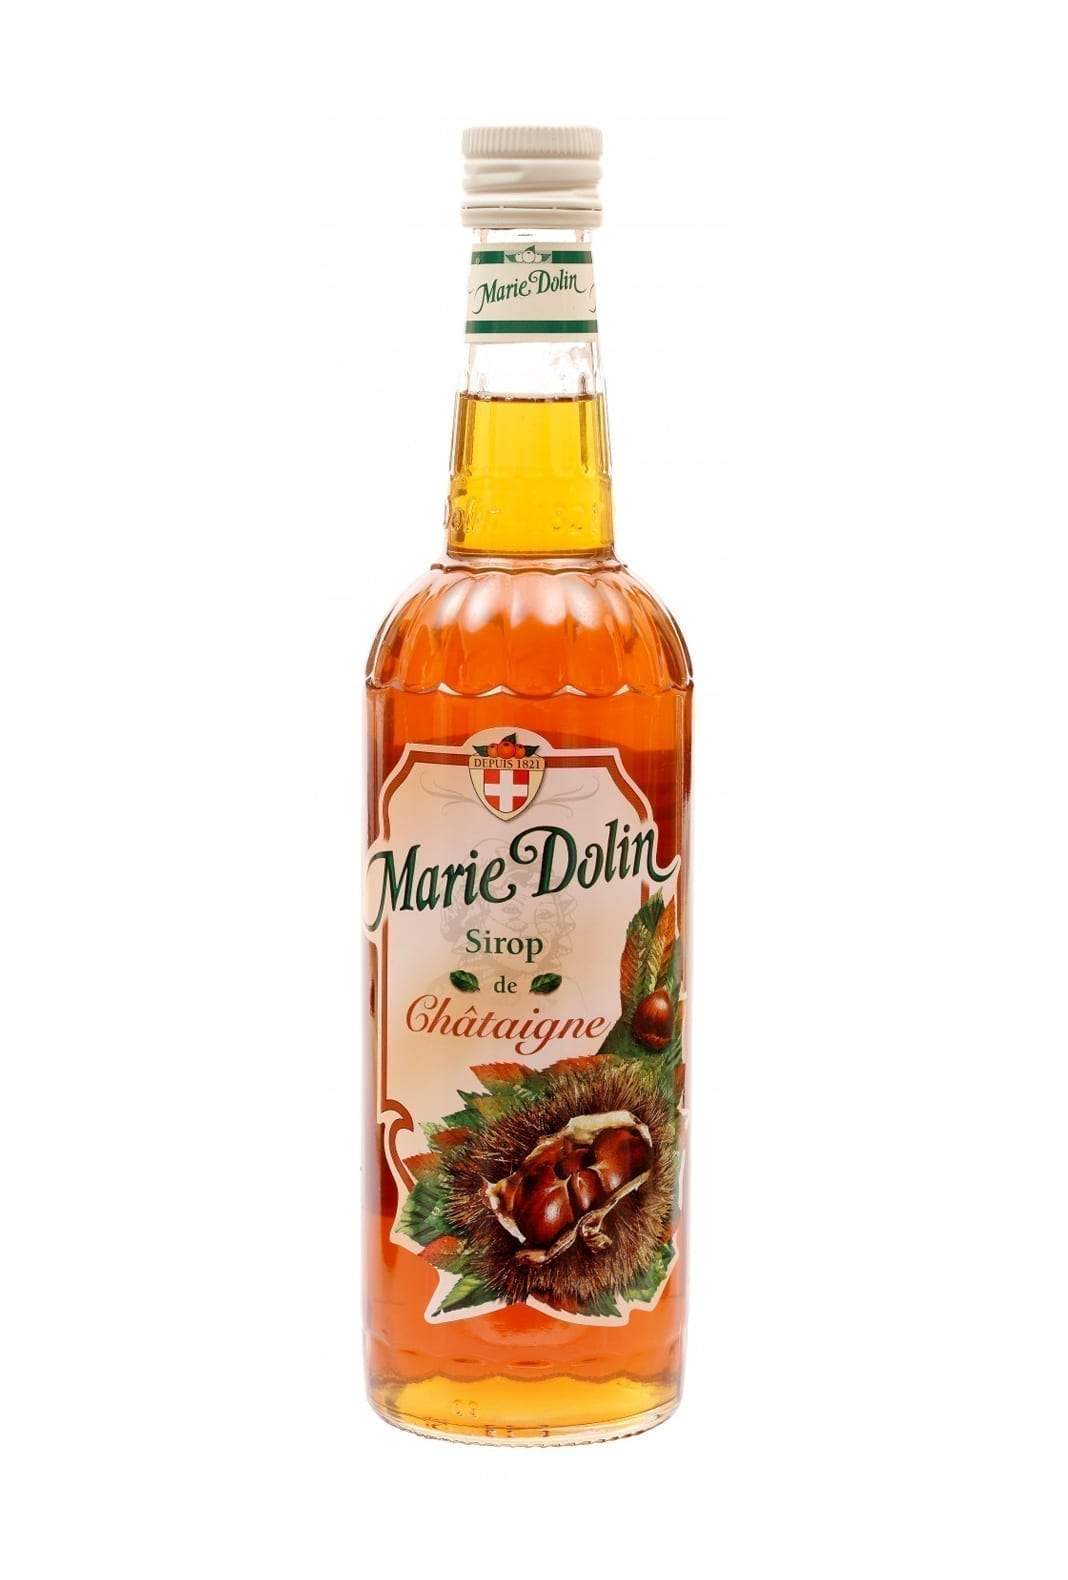 Marie Dolin Sirop de Chataignes (Chestnut) Syrup 700ml | Syrup | Shop online at Spirits of France